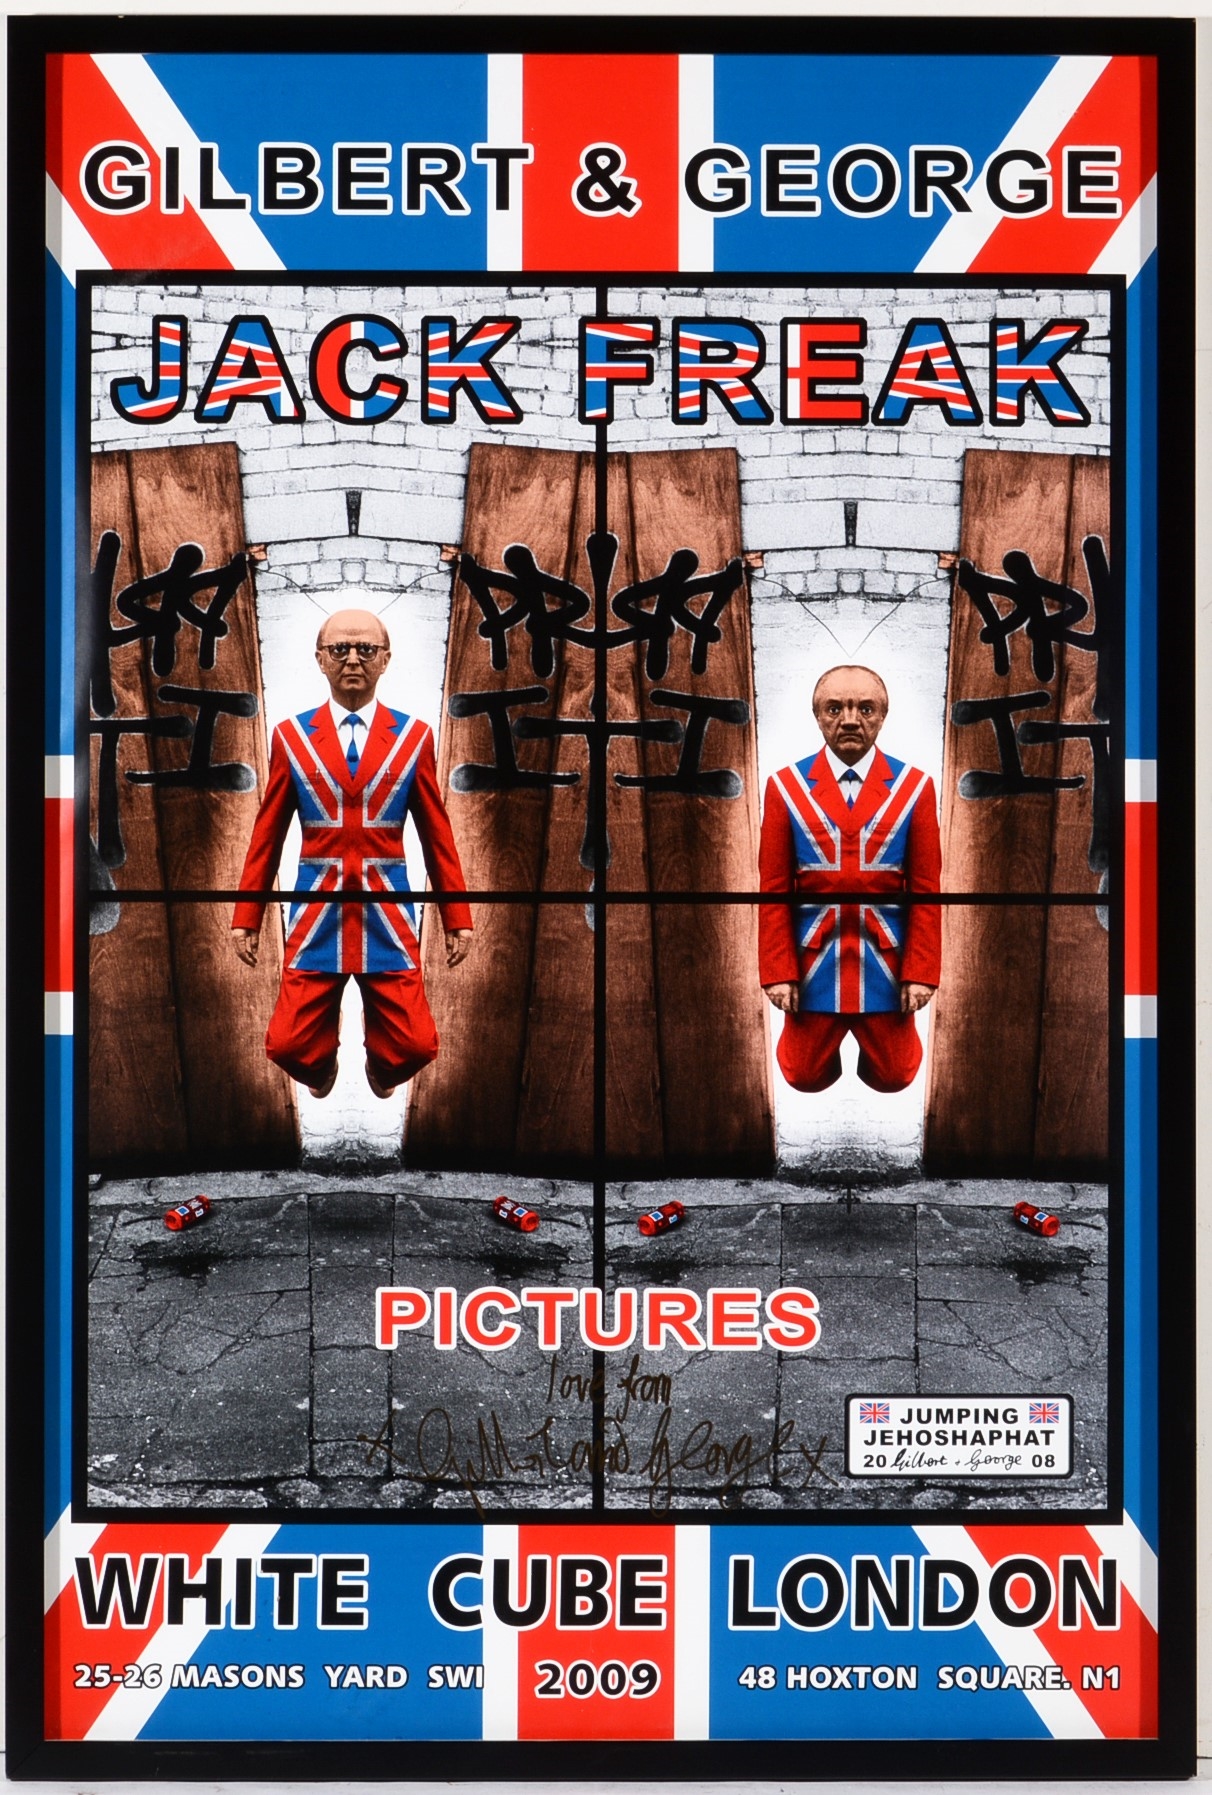 Artwork by Gilbert & George, Jack Freak Pictures, Made of poster